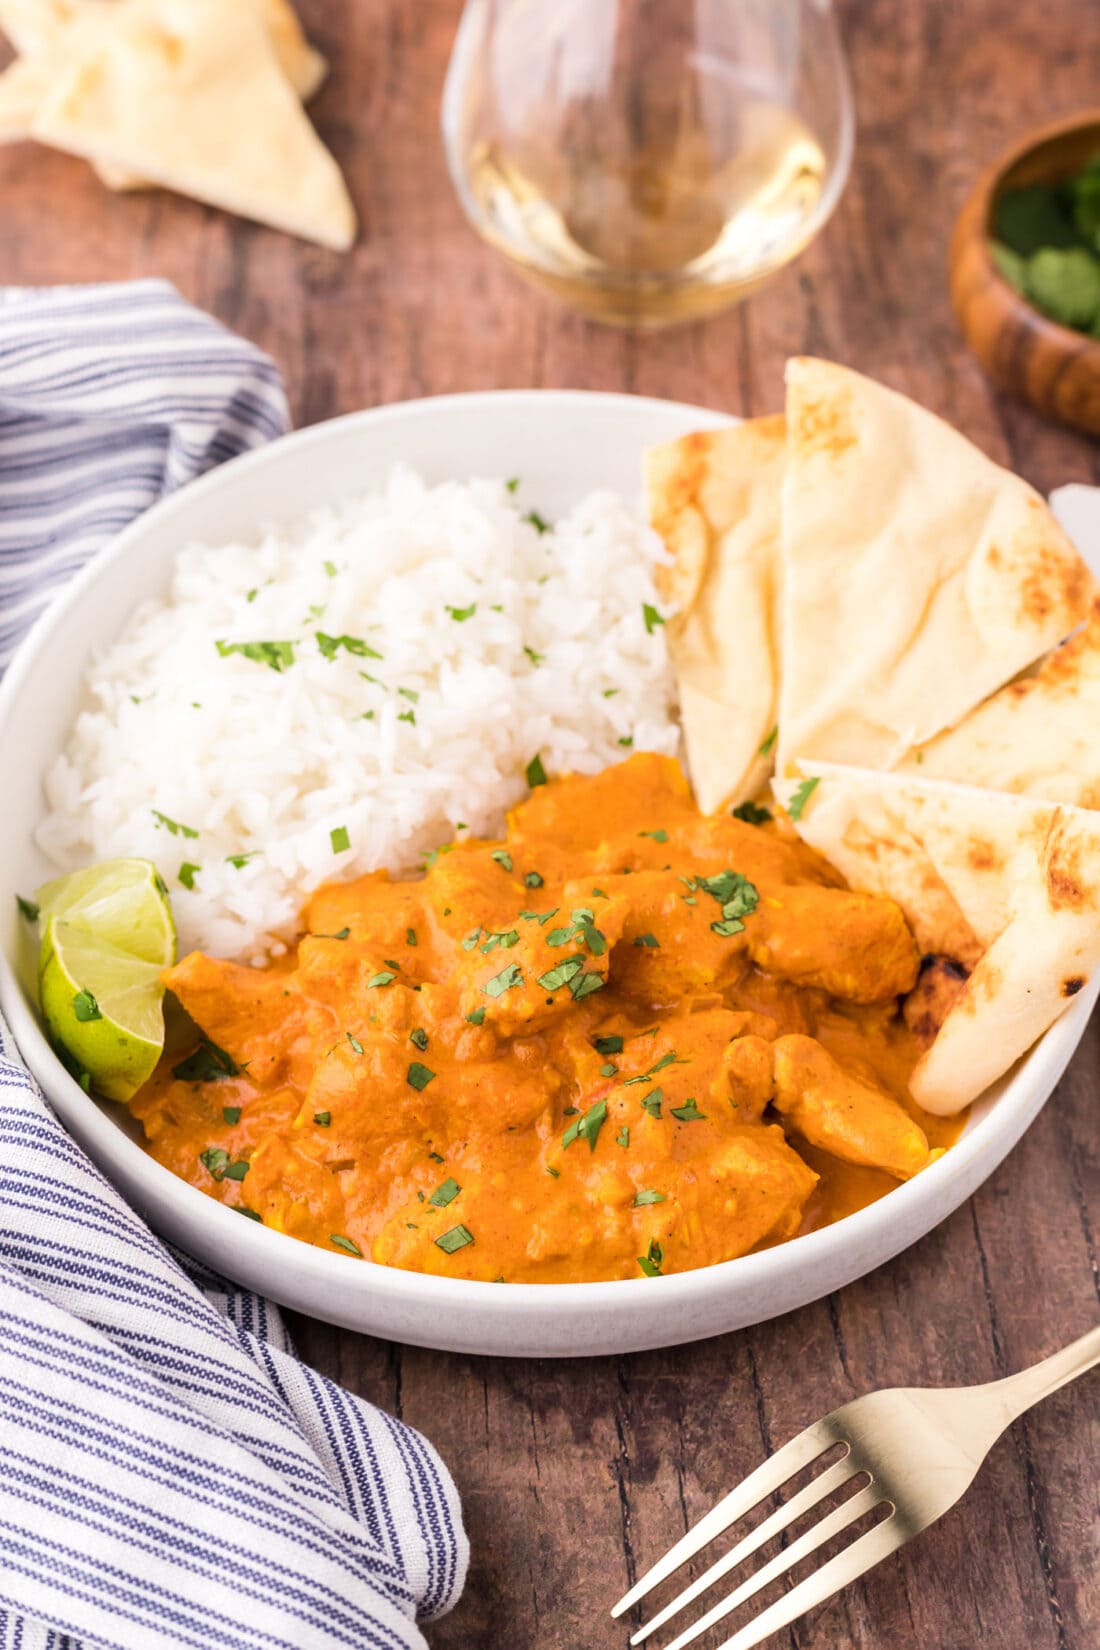 Bowl of Chicken Tikka Masala with rice and naan bread